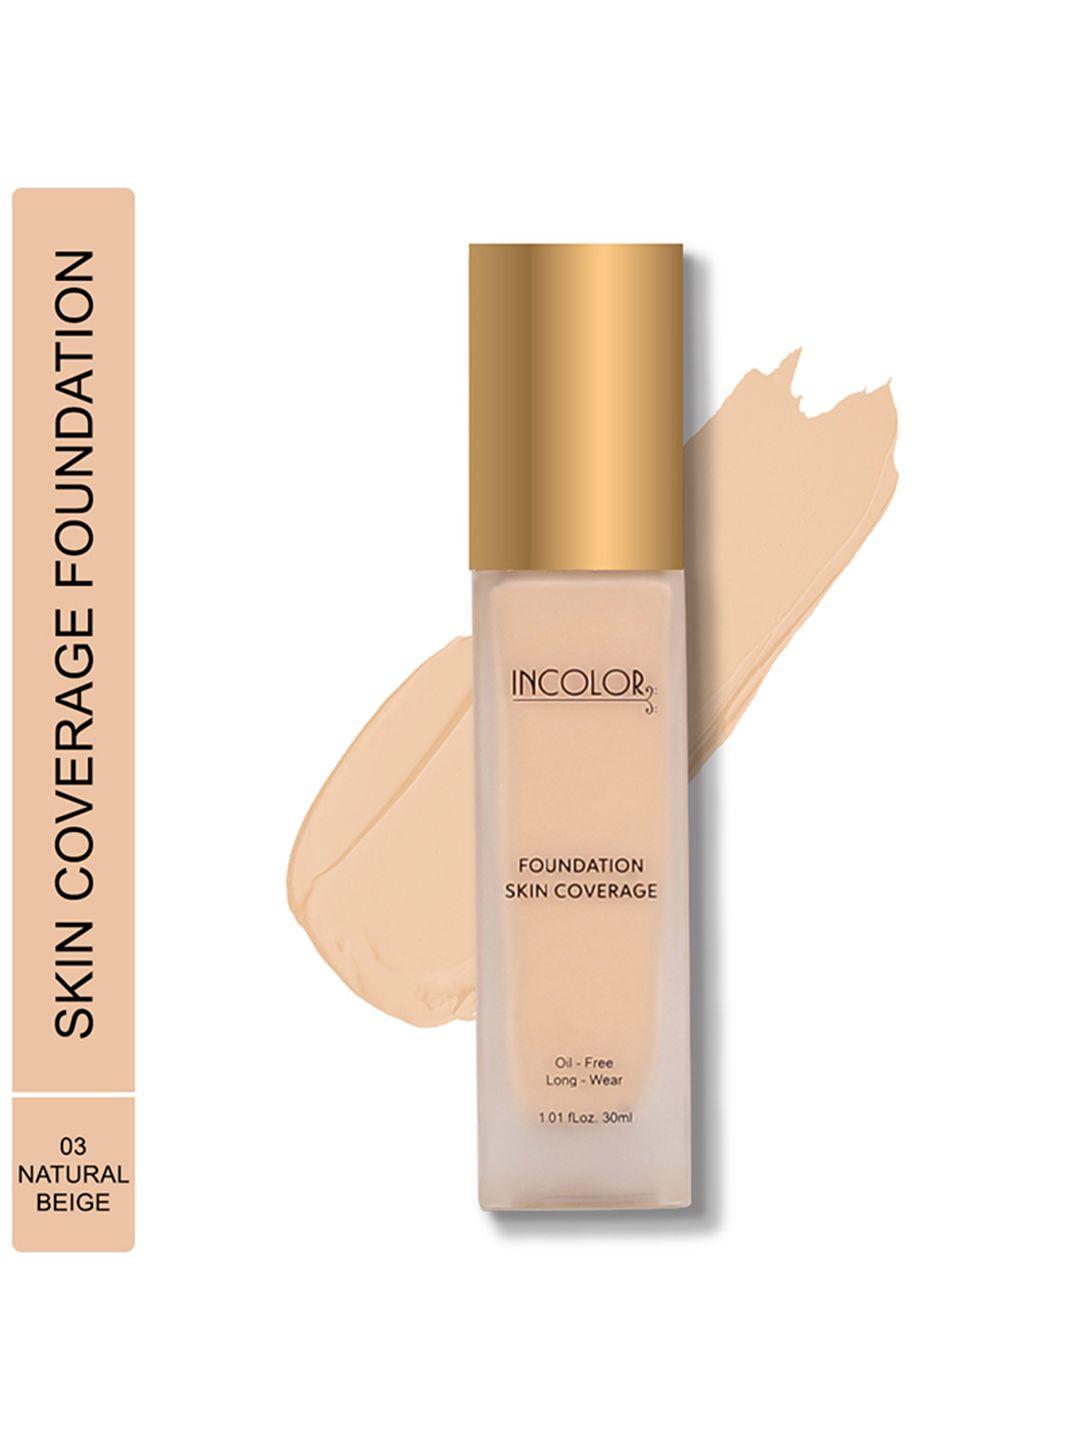 incolor skin coverage  oil-free & long wear foundation 30 ml - natural beige 03